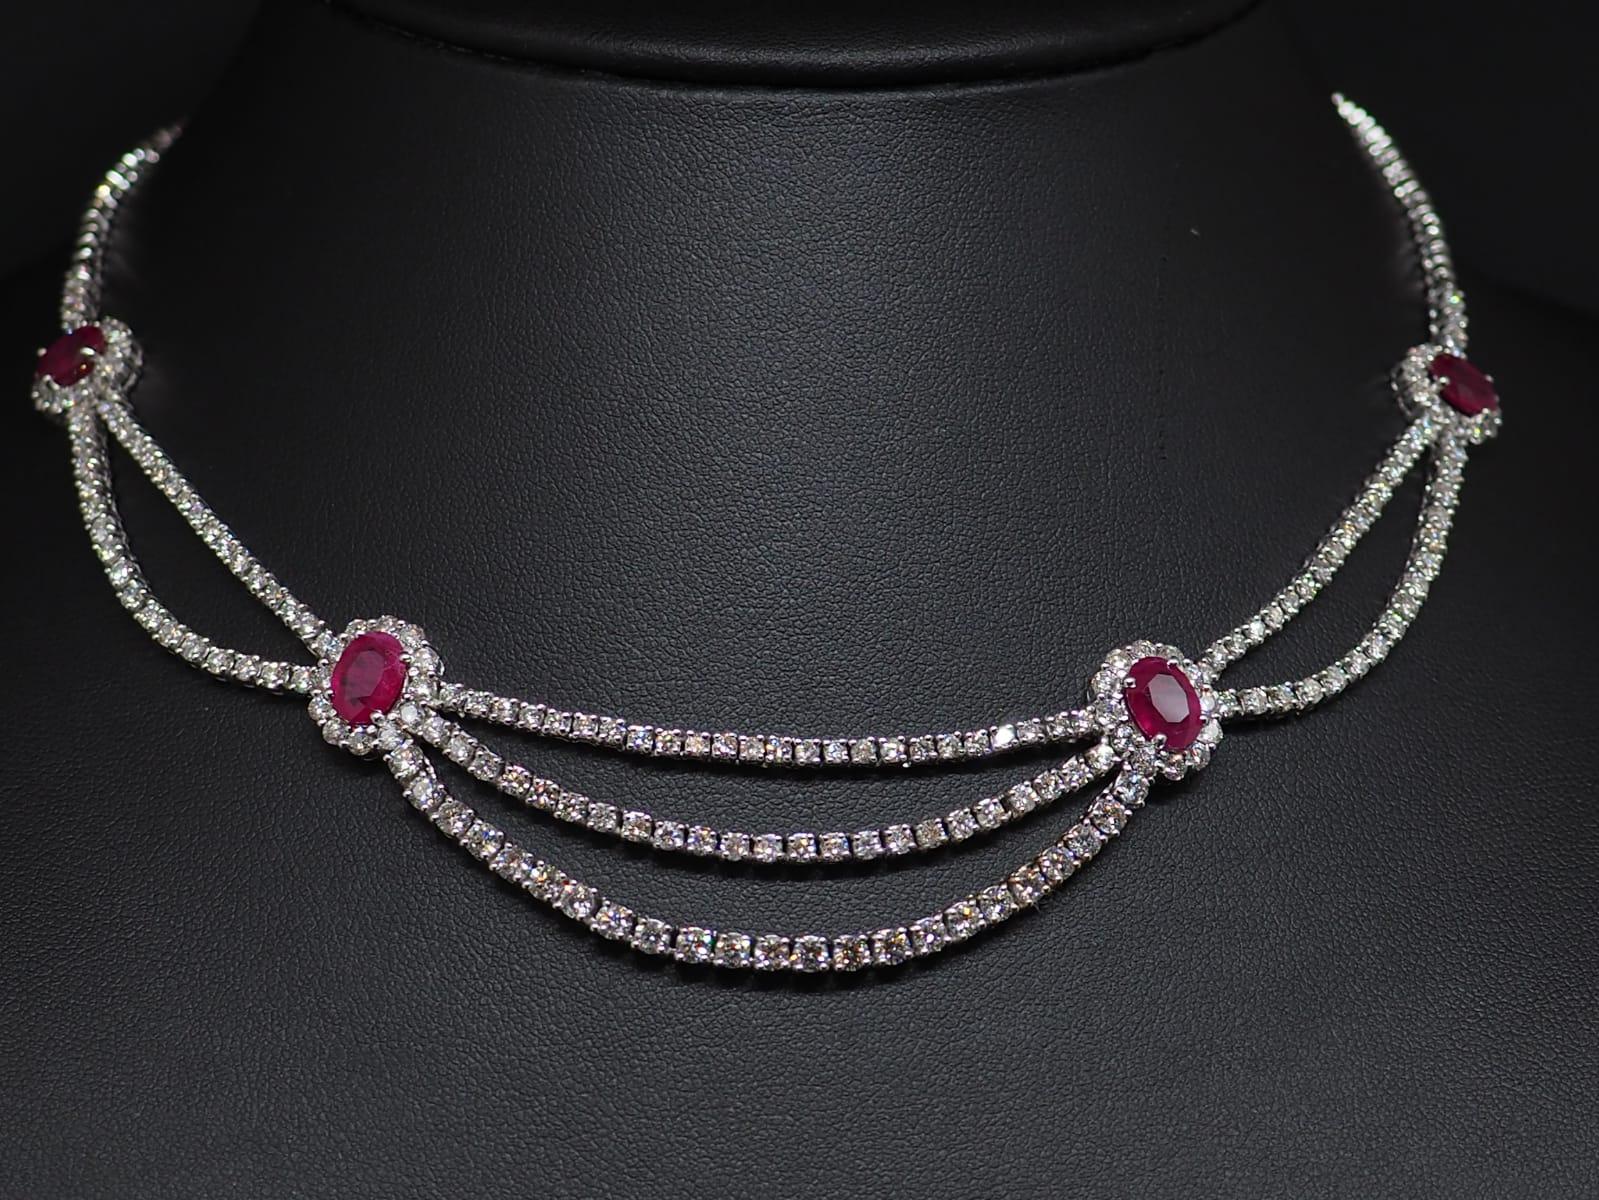 A gorgeous 18K diamond and ruby tennis necklace. It features 155 brilliant-cut round diamonds with a total weight 5.65 carats and 4 oval rubies with a total weight 10.8 carats. 4 not-heated rubies surrounded by diamond crowns divide the necklace in